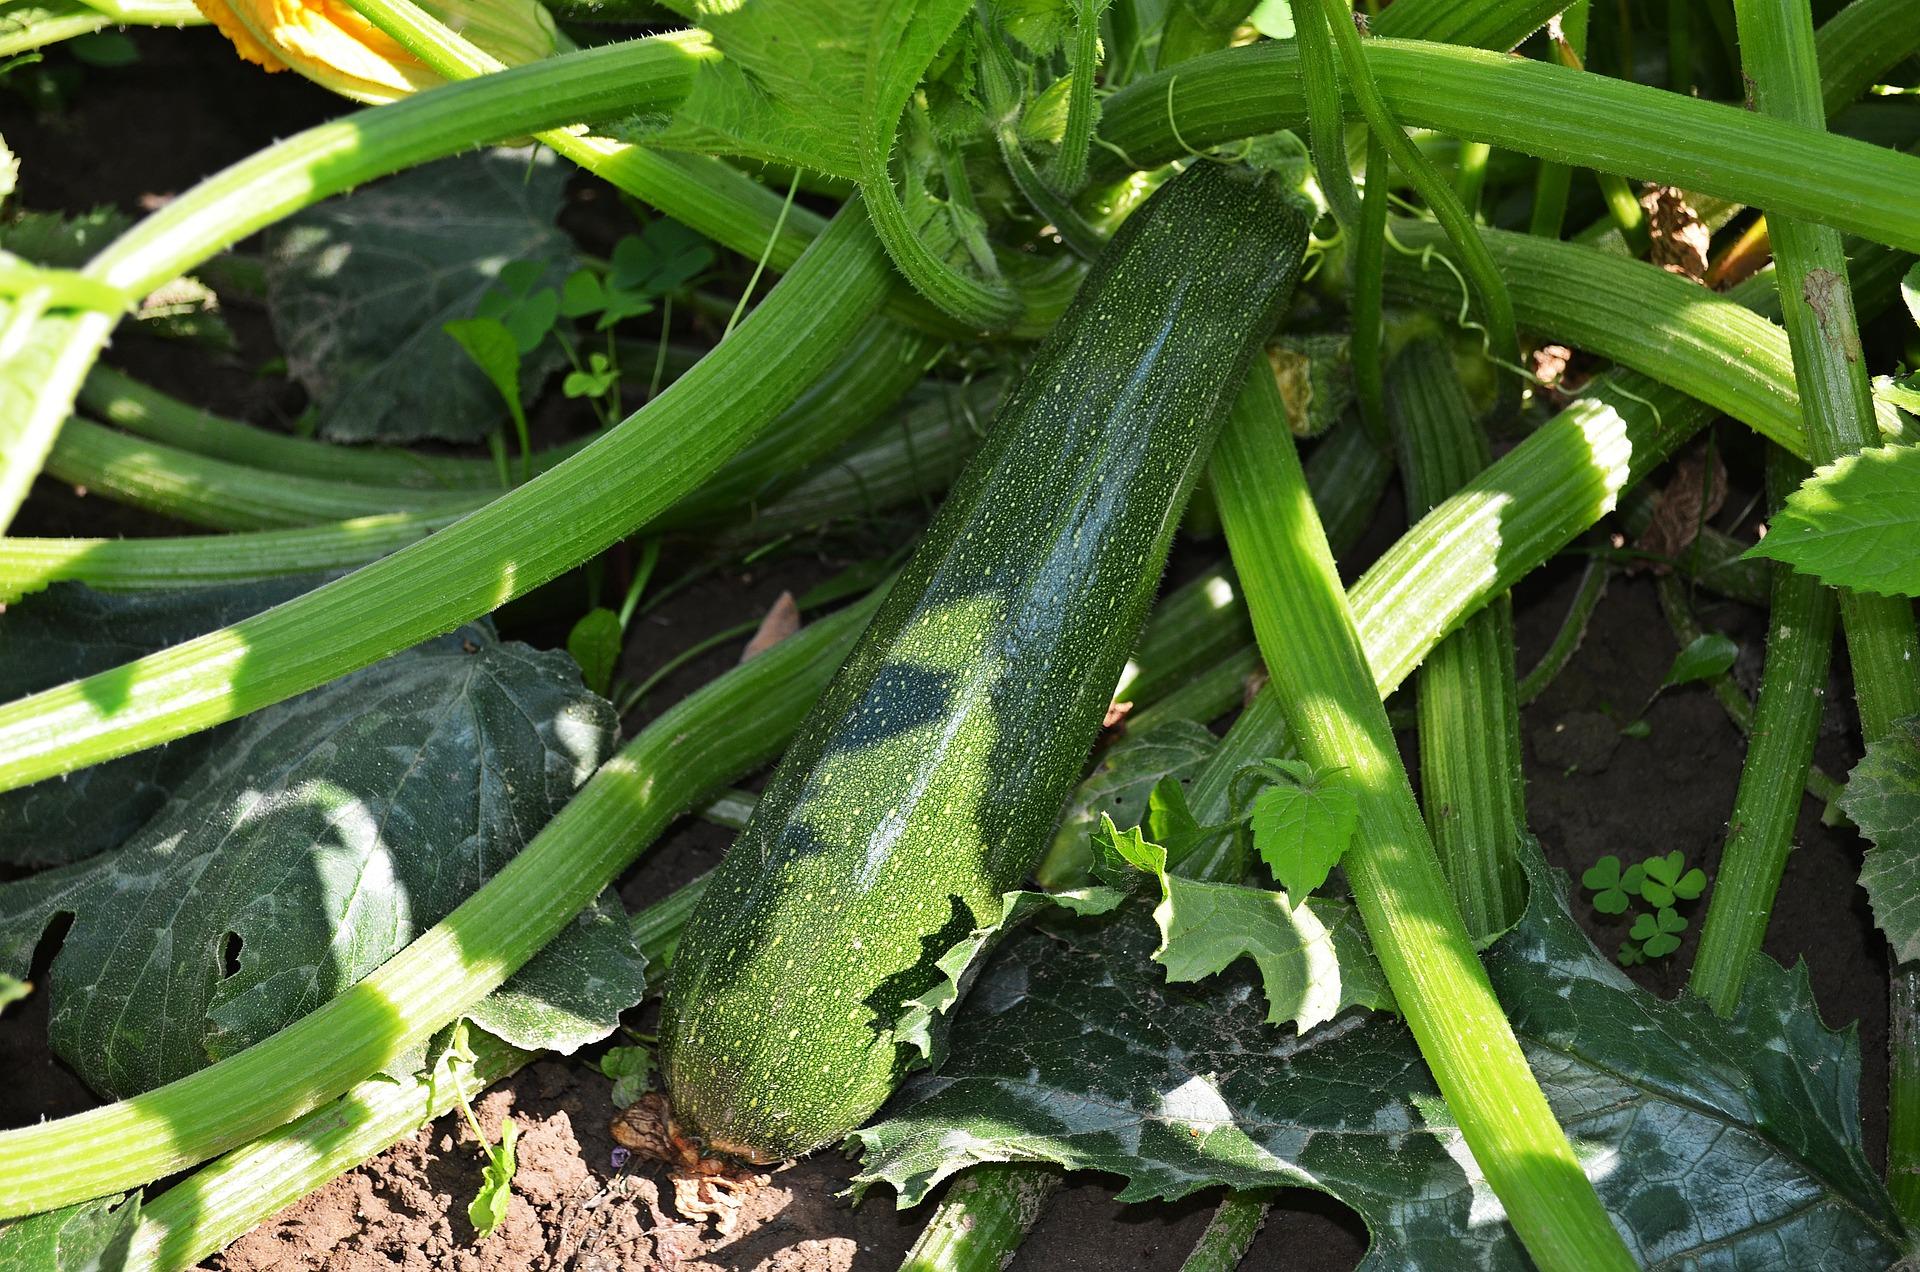 uploads/images/Courgette 847094_1920